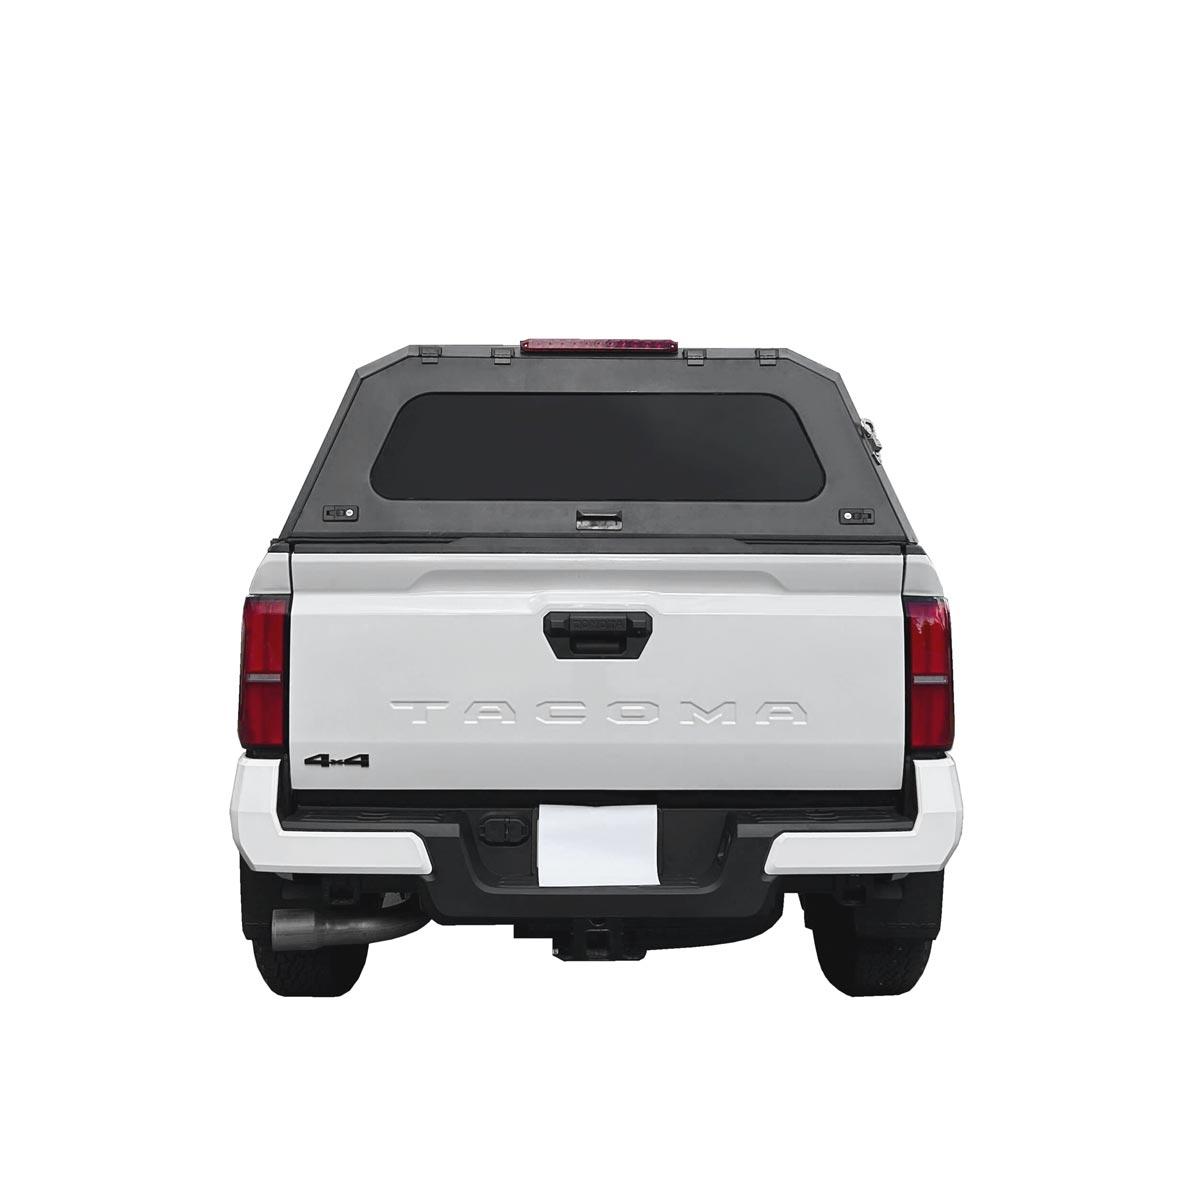 LOADED Truck Cap for Toyota Tacoma 2005-2015